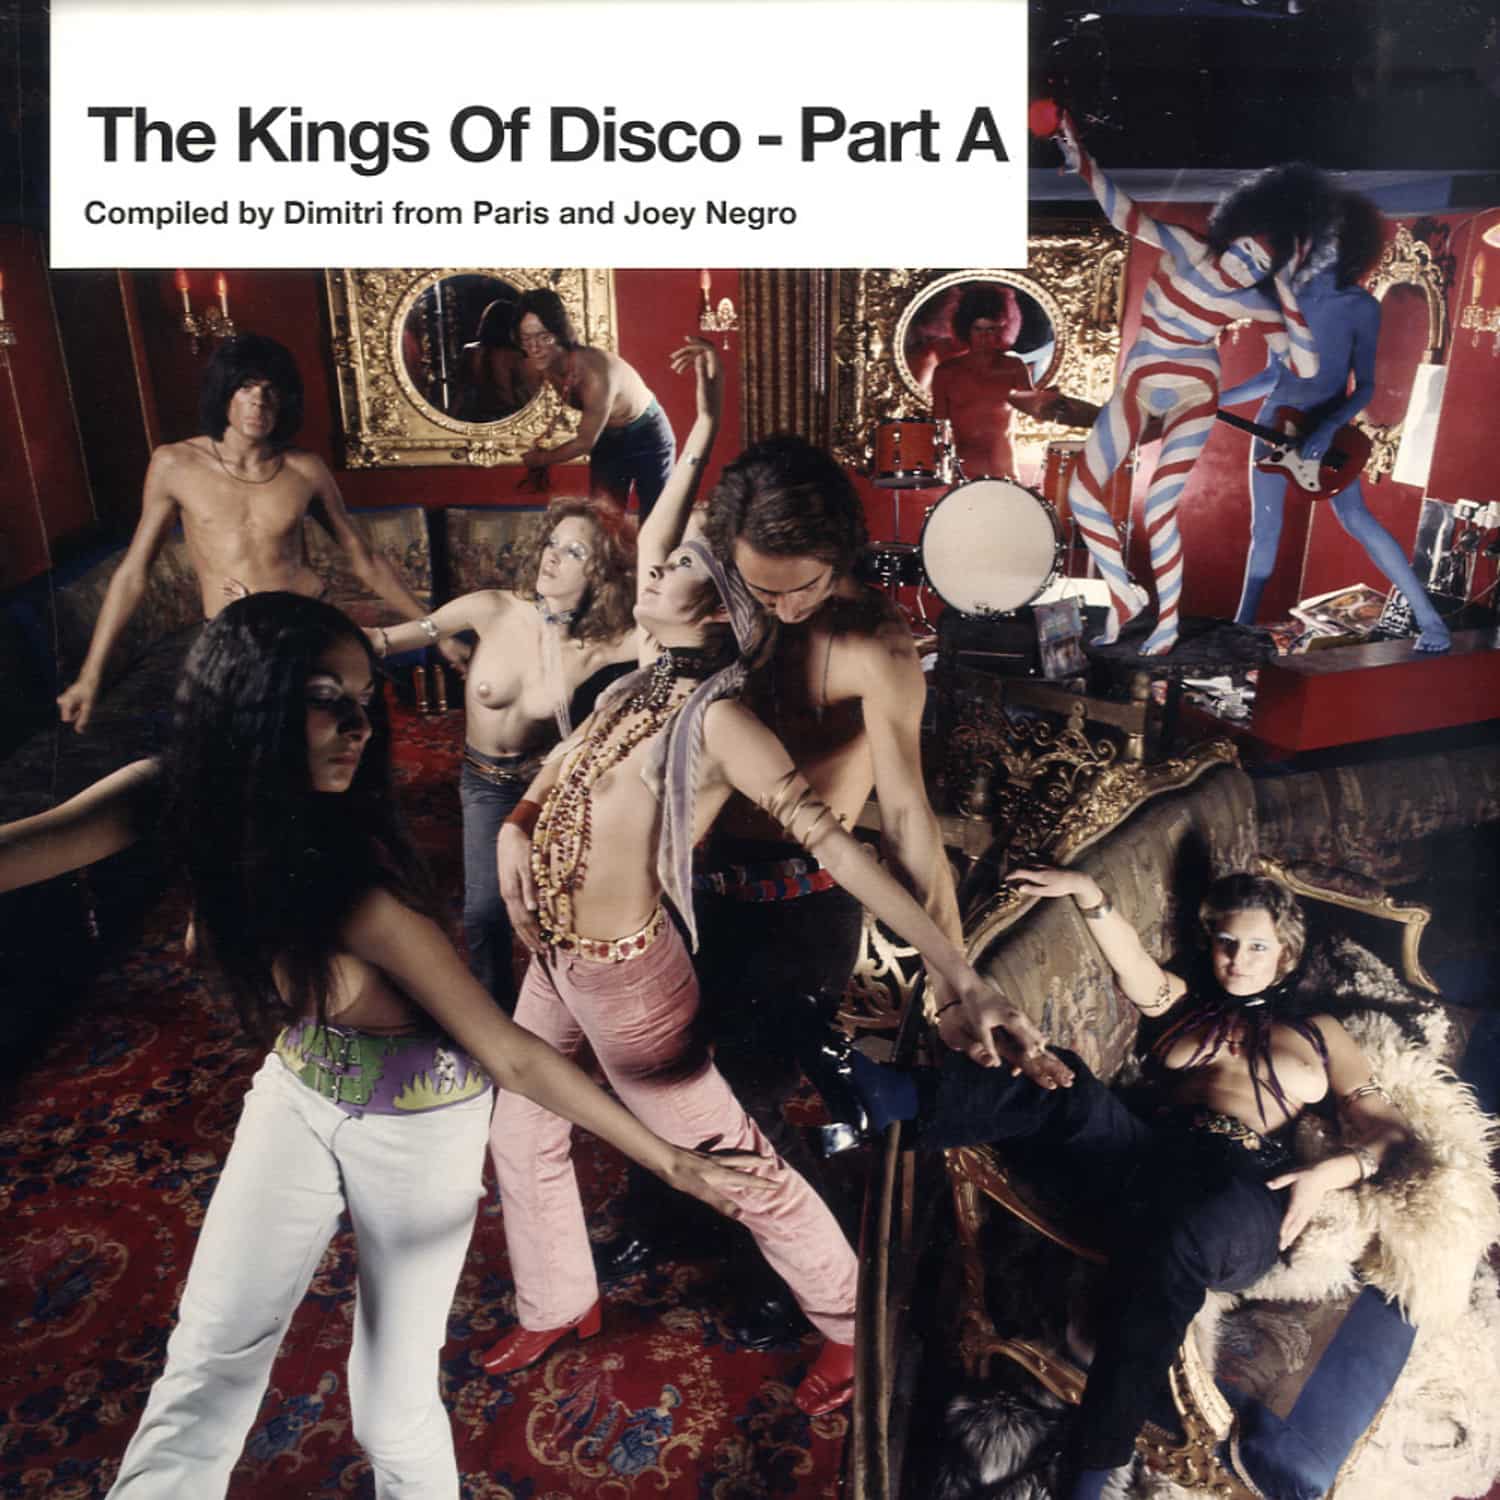 V/A compiled by Dimitri from Paris & Joey Negro - The Kings of Disco - Part A 